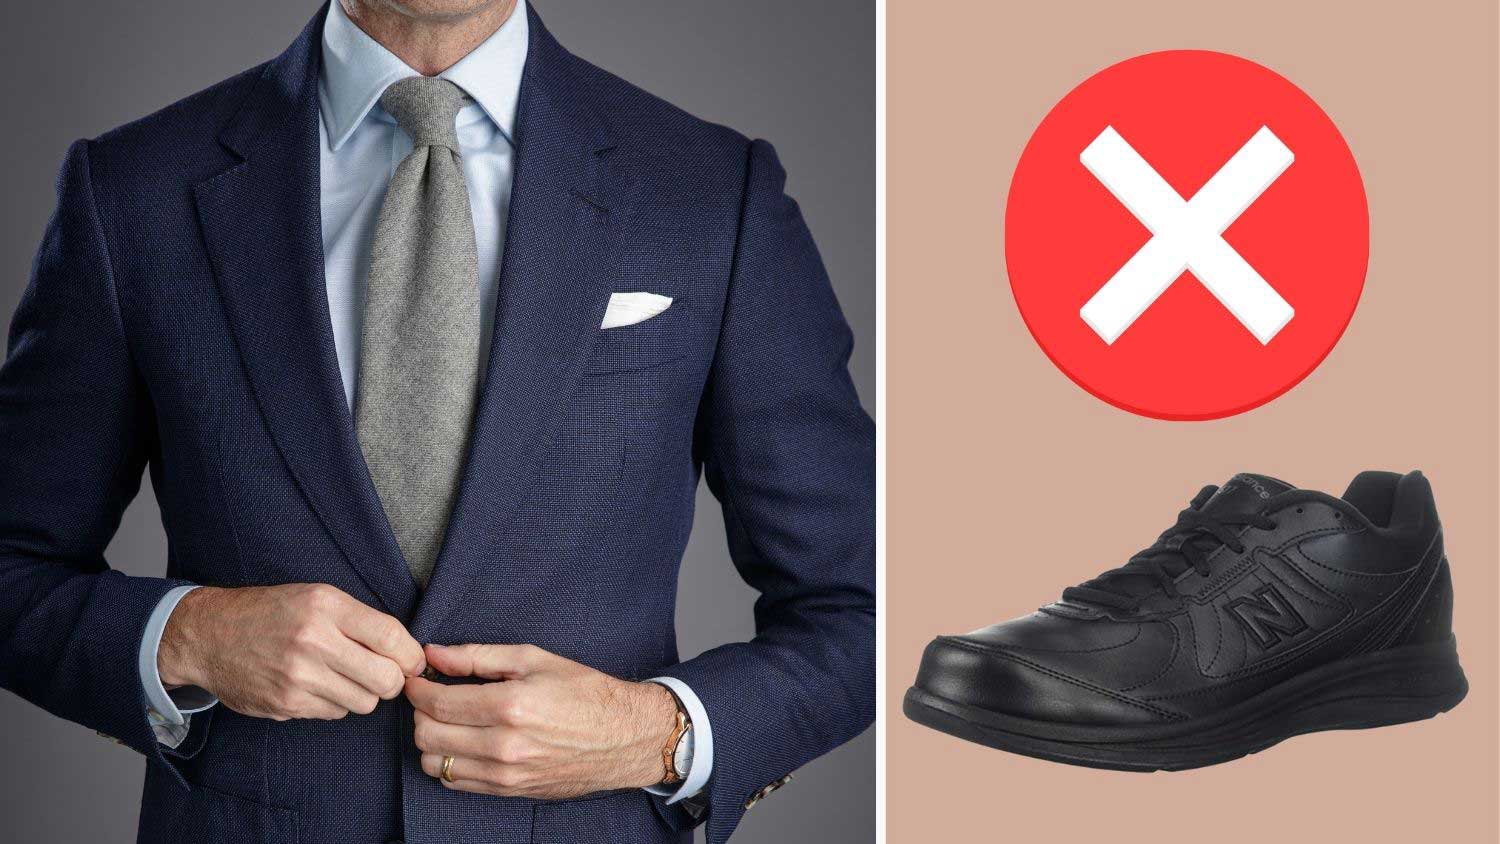 Wearing comfort shoes with dressy clothing makes men look older